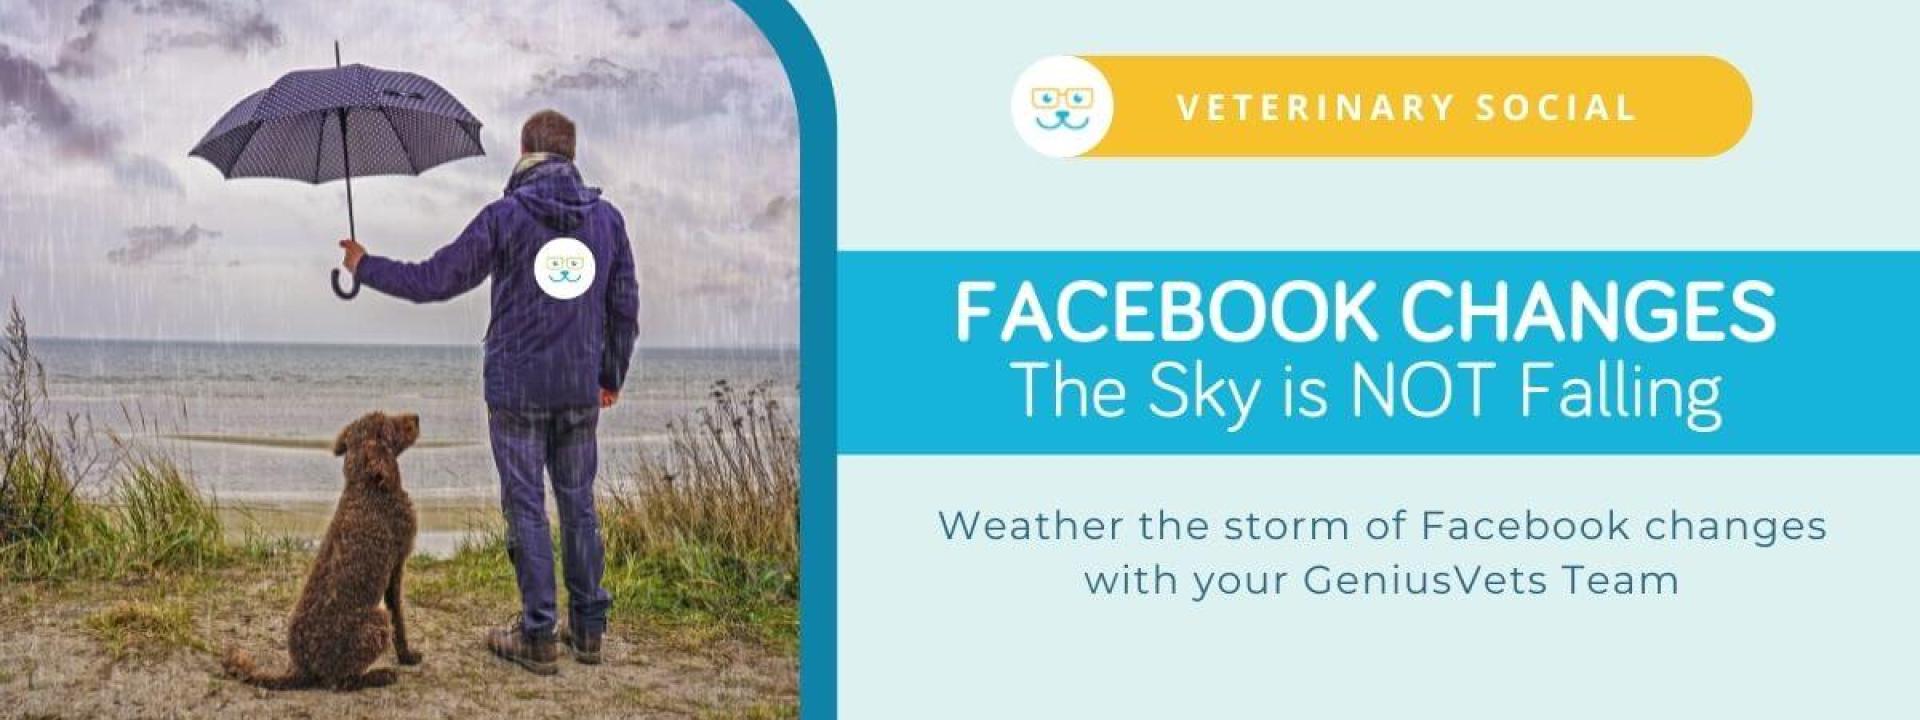 Facebook Changes - The Sky is NOT Falling!